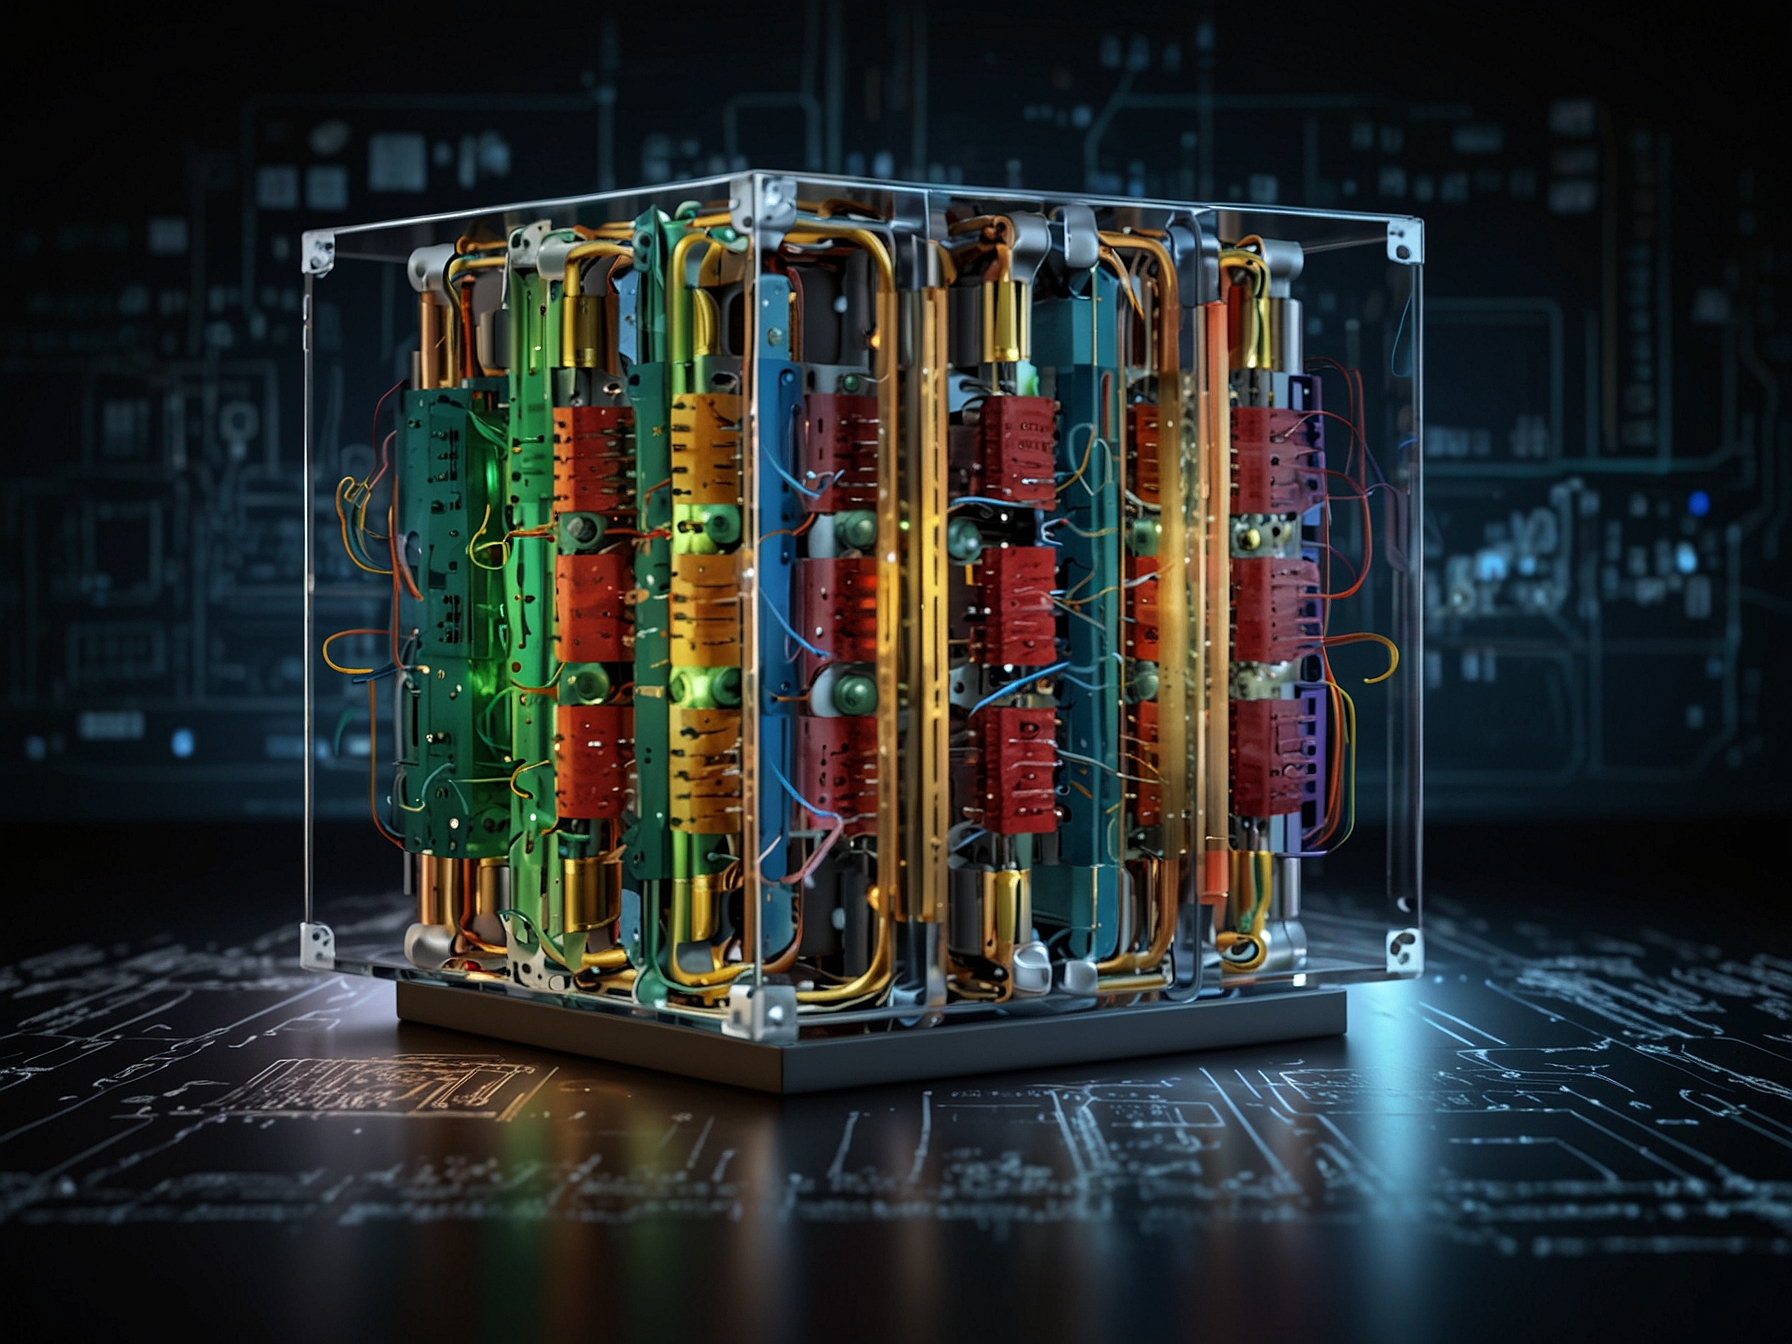 An illustration of Google's hybrid quantum computer showing its digital and analog components working together to simulate magnetic behaviors.